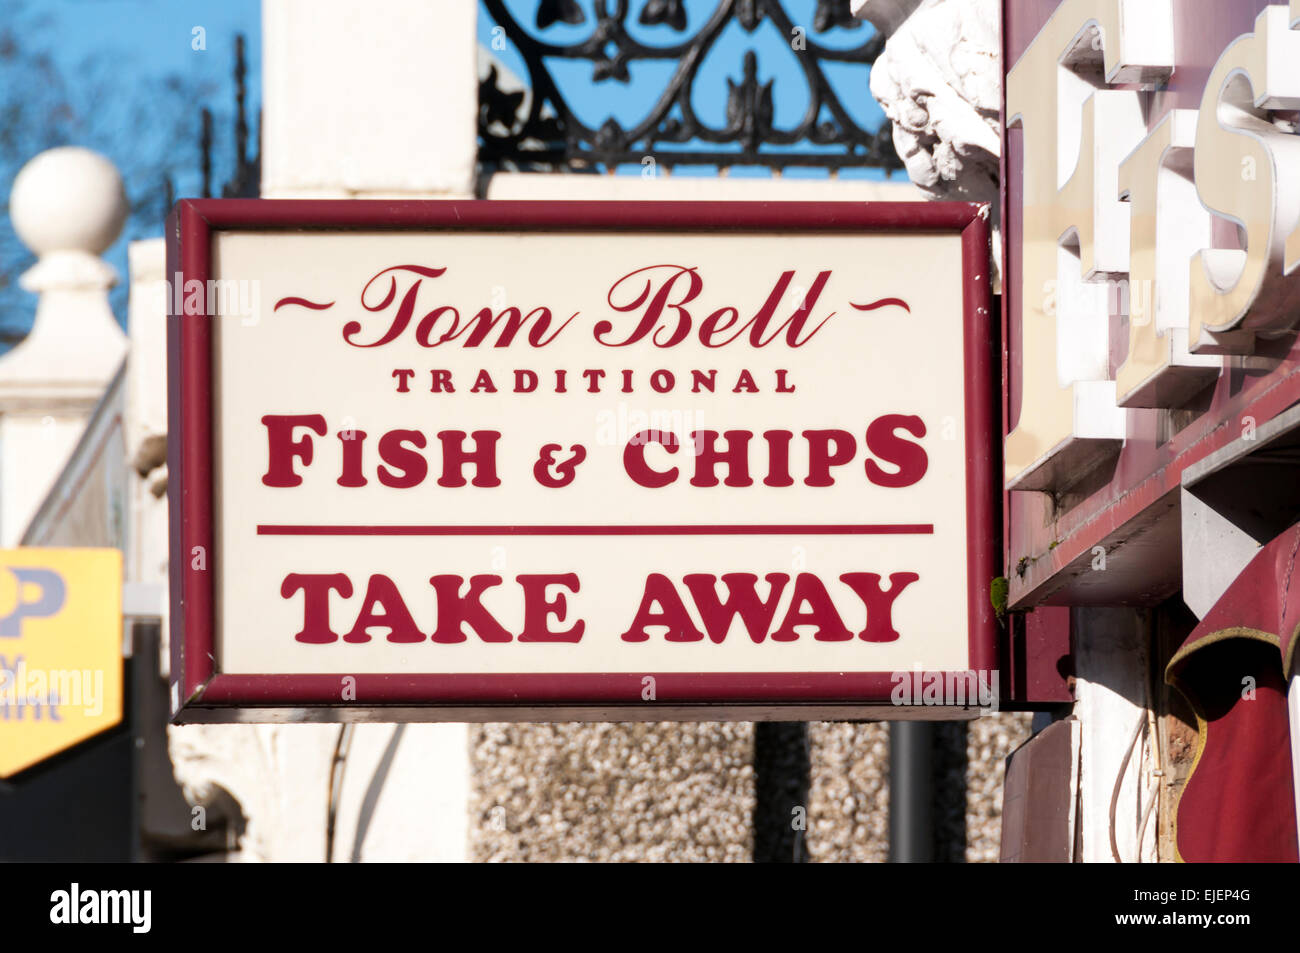 Traditional Fish & Chips sign in South London. Stock Photo